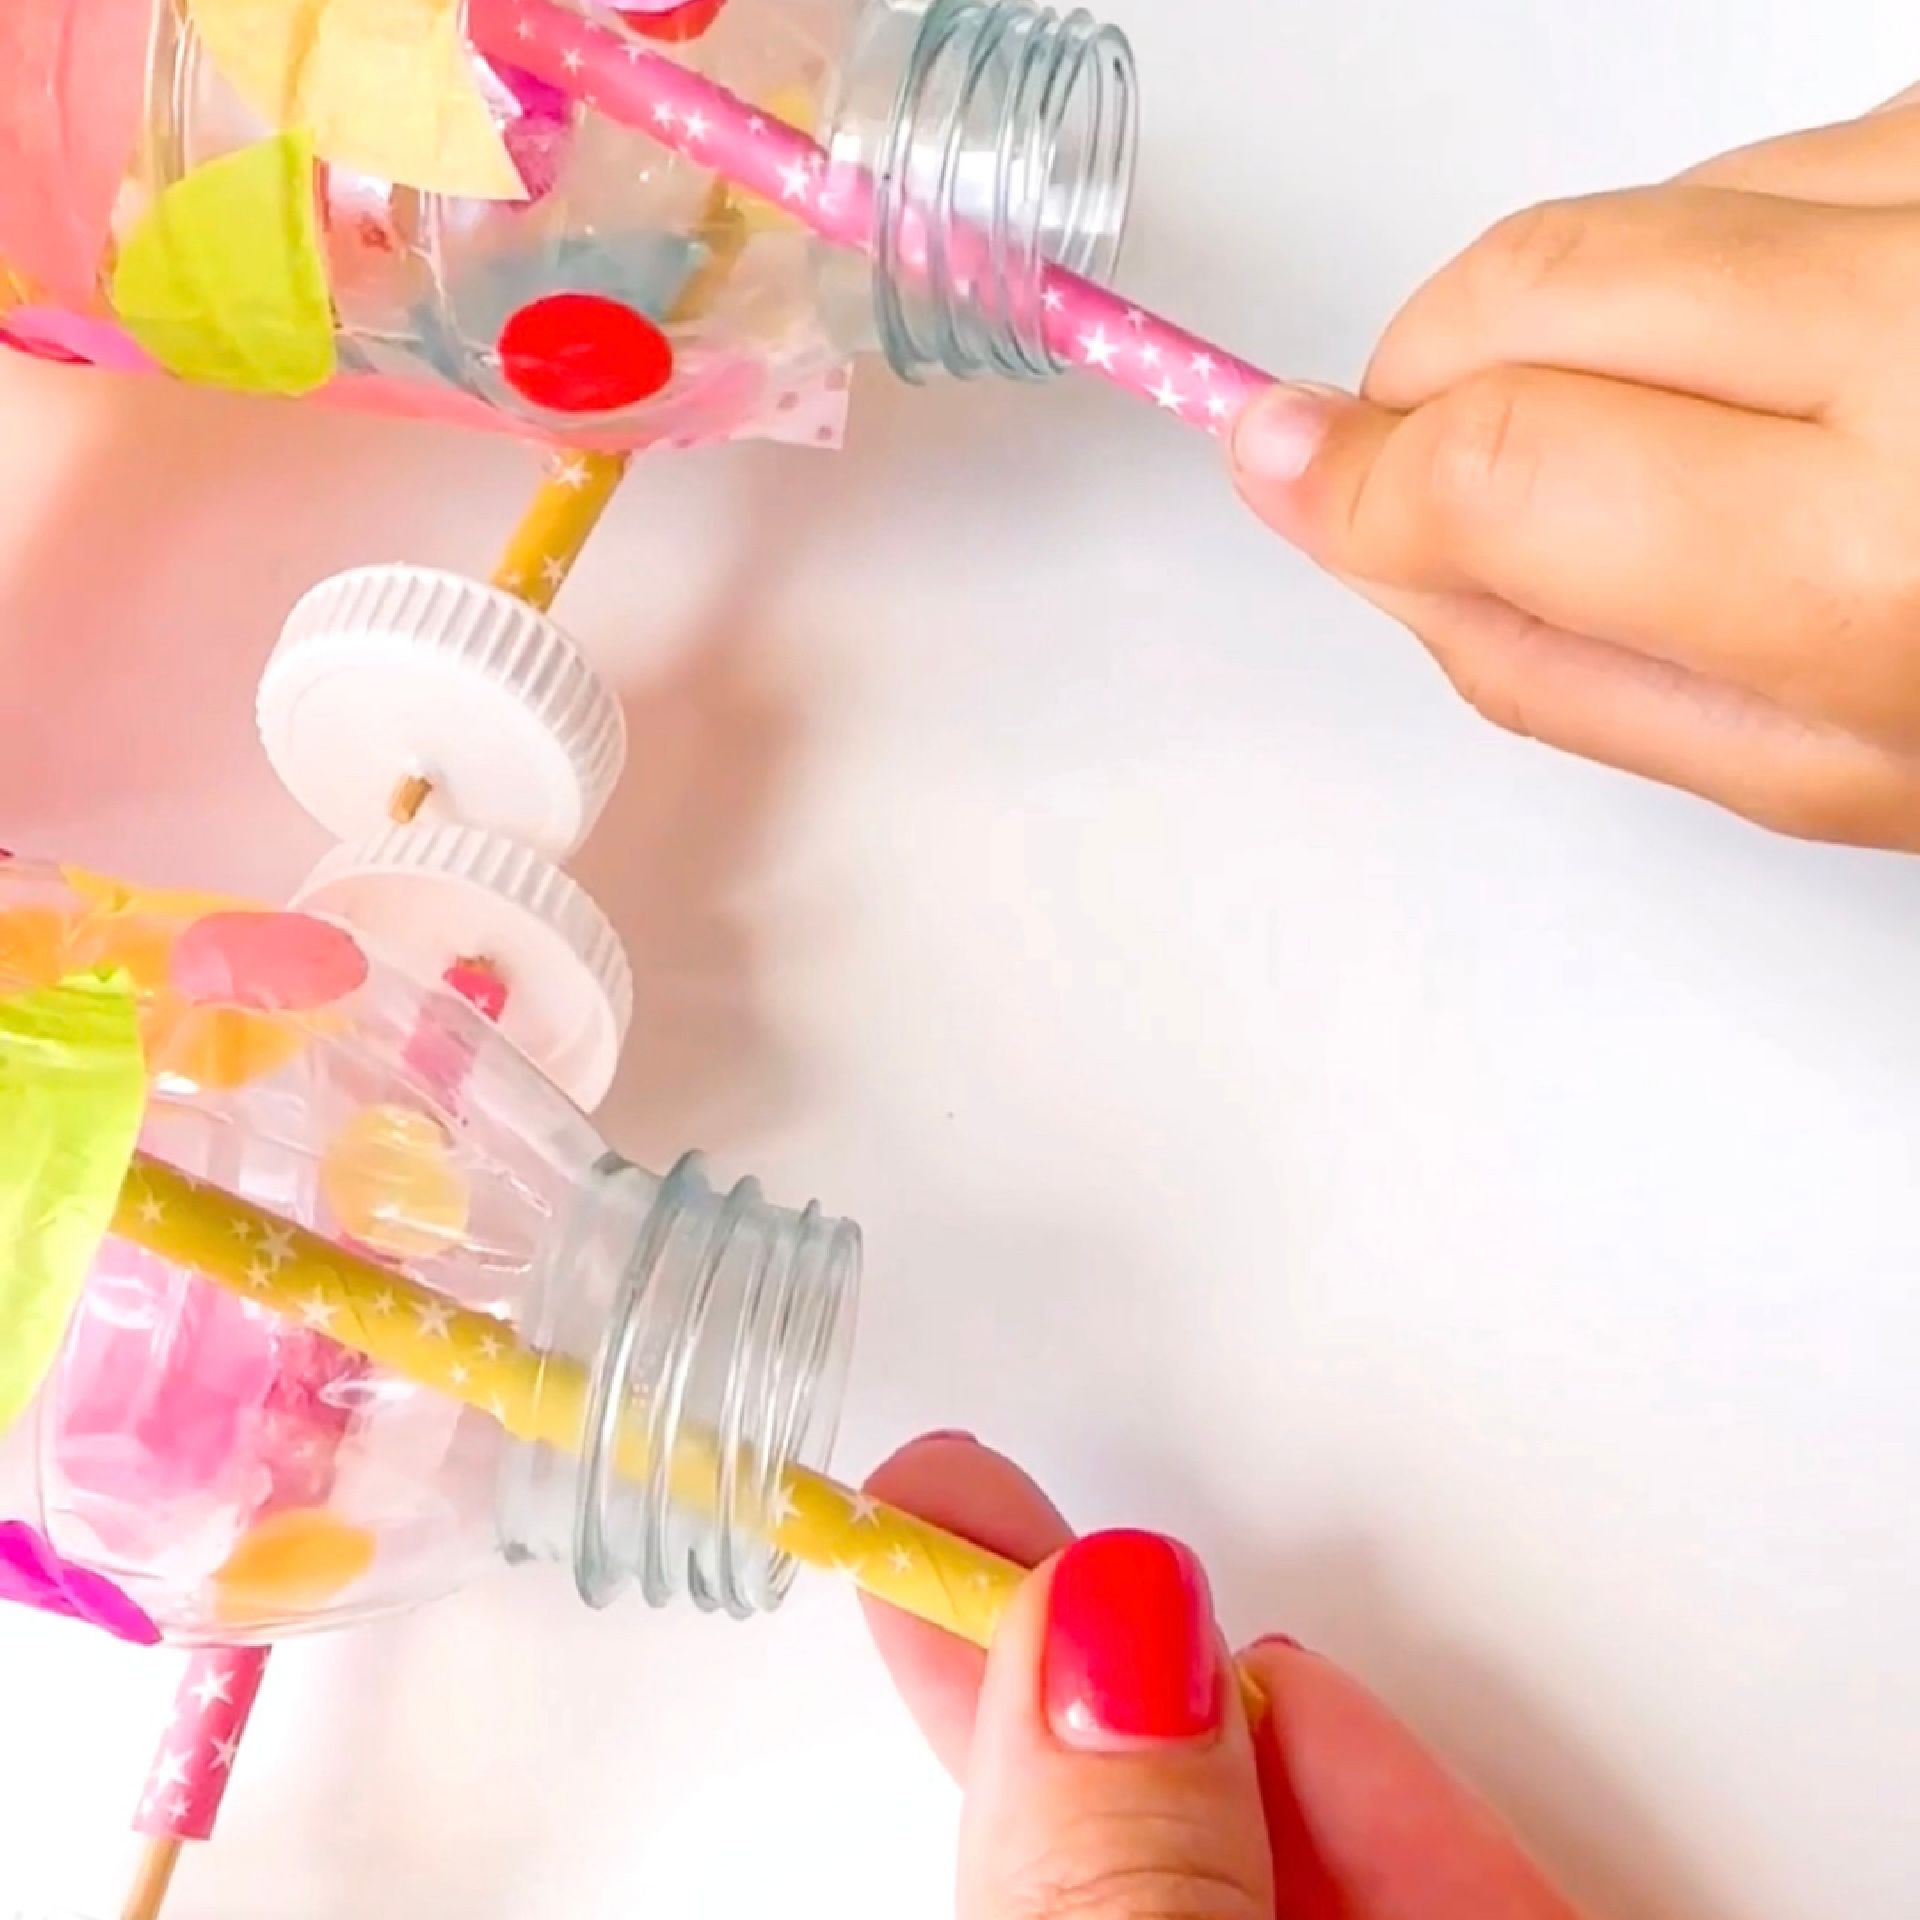 A hand threading a paper straw through the neck of a plastic bottle